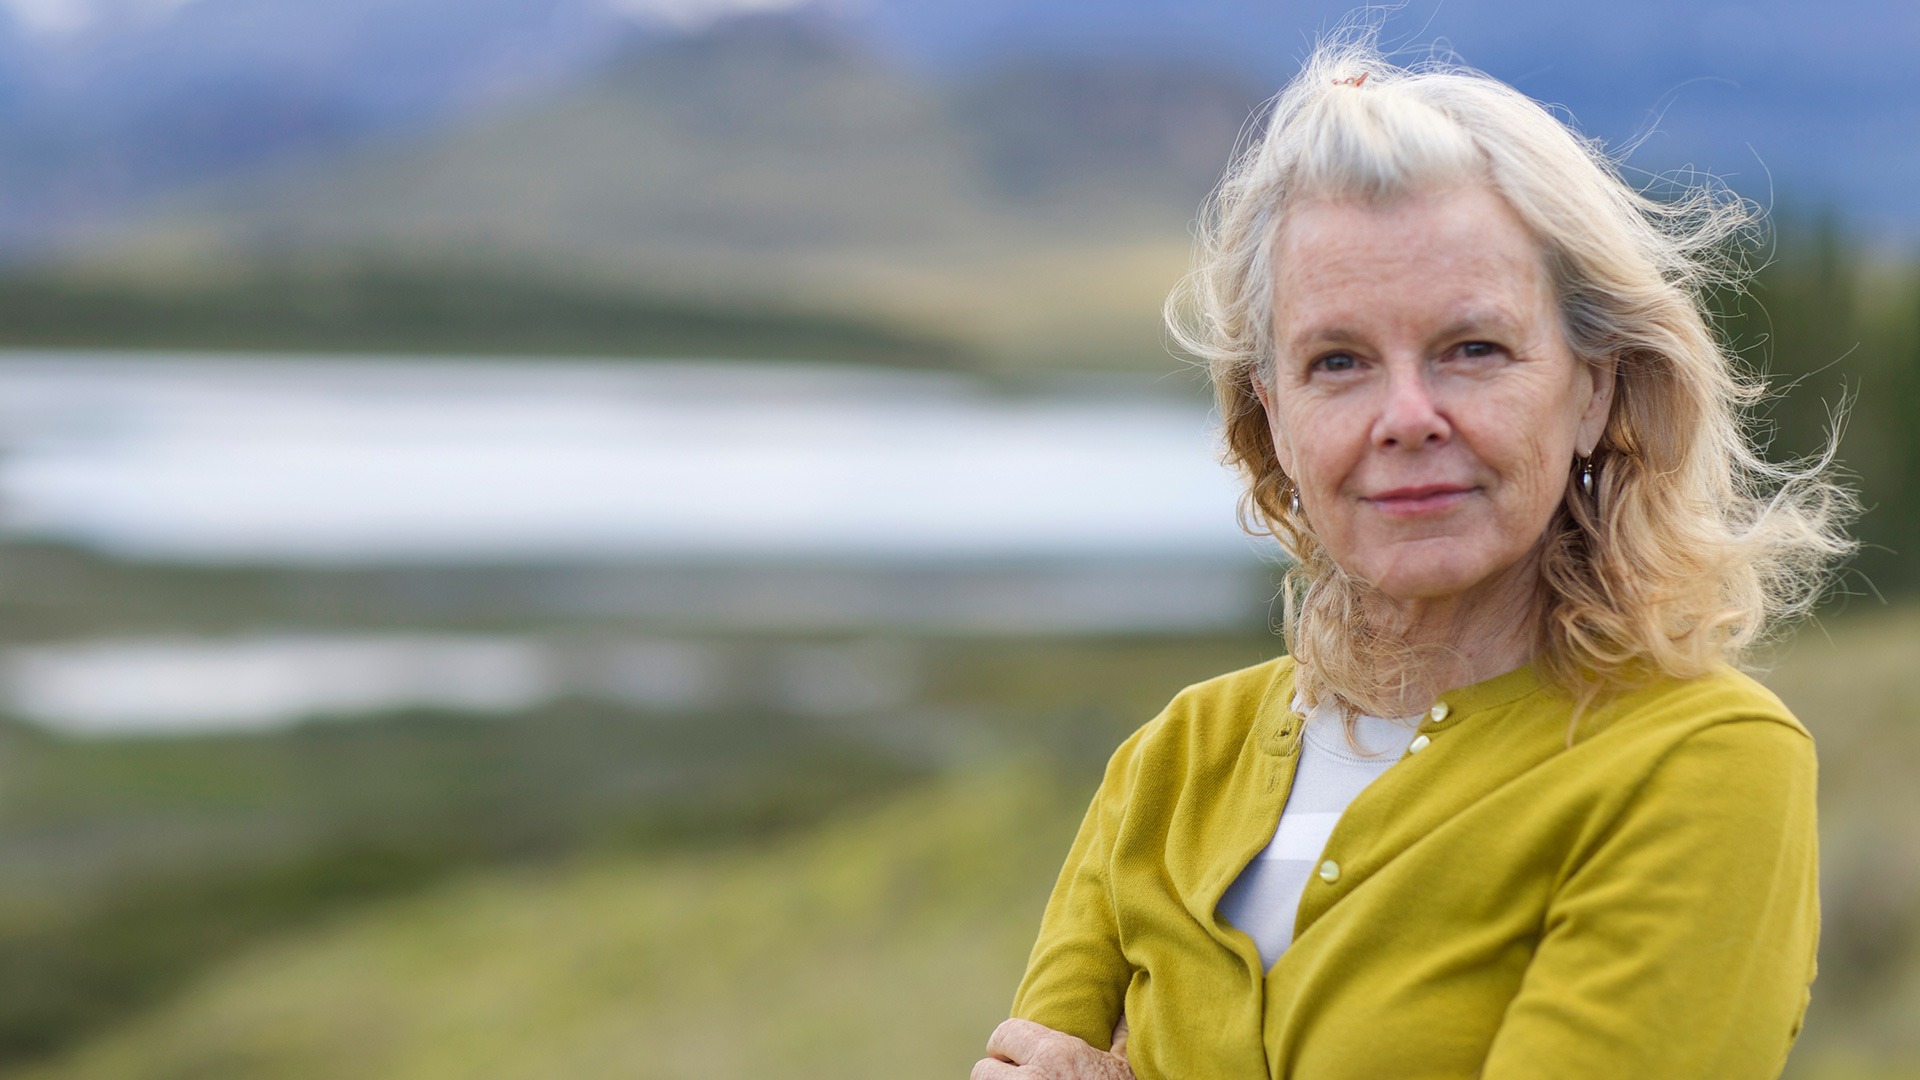 Tompkins Conservation co-founder Kris Tompkins in Patagonia